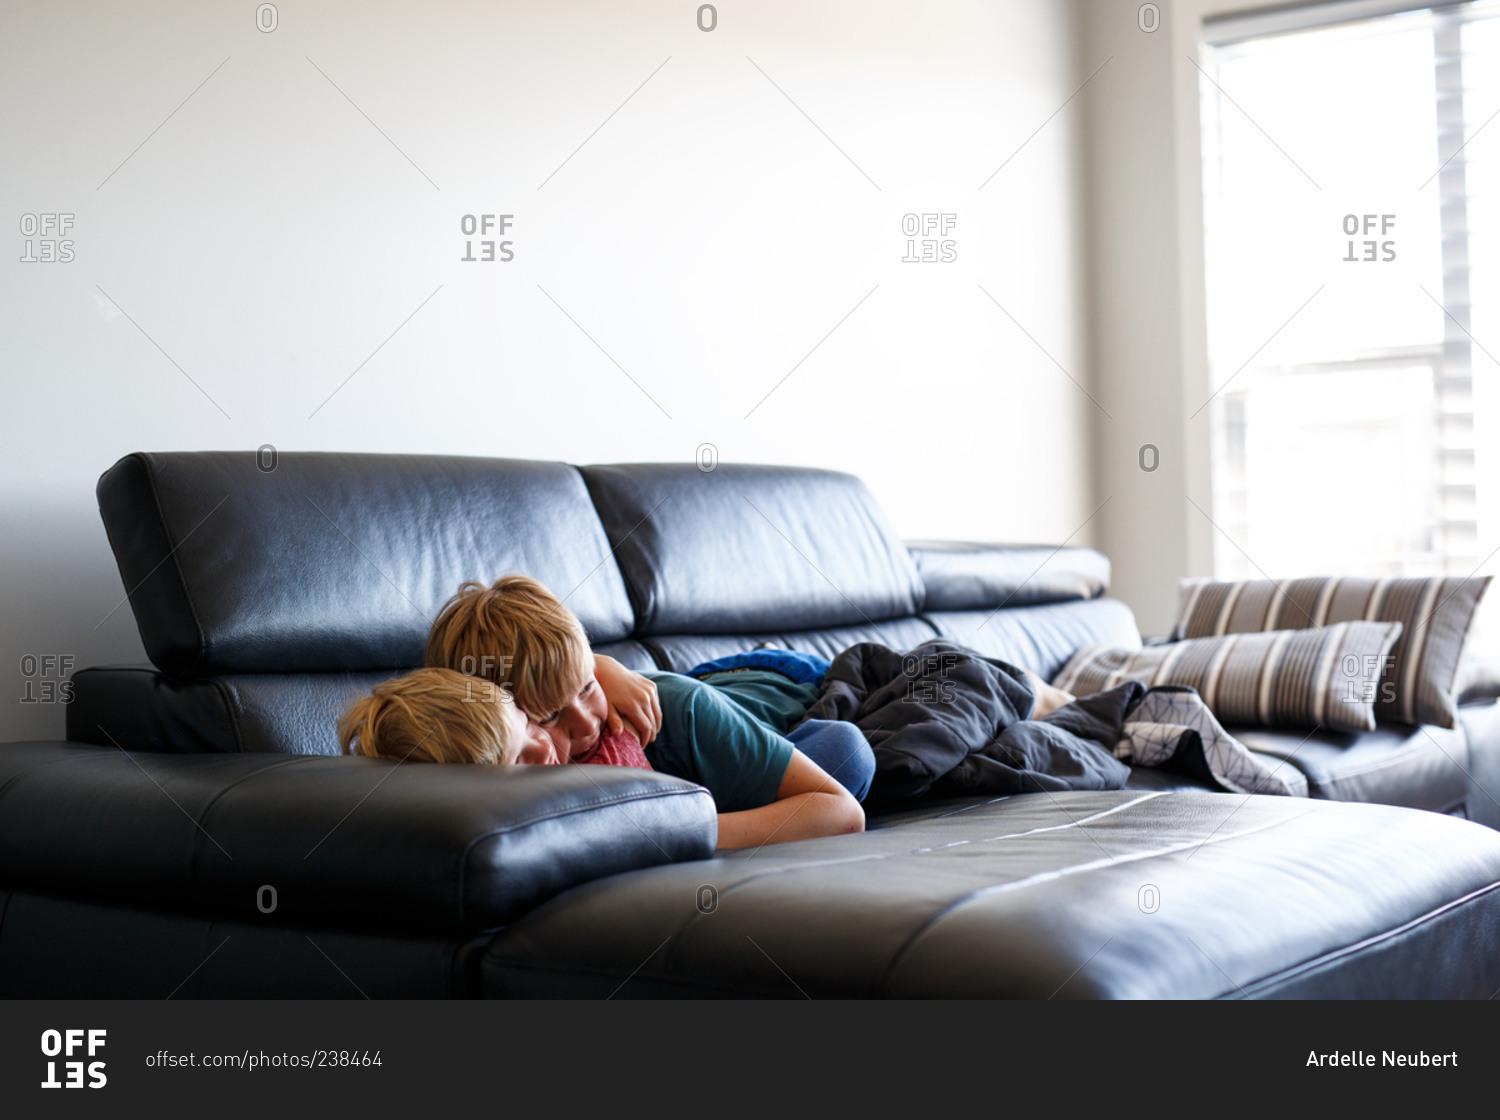 Siblings cuddling on a couch